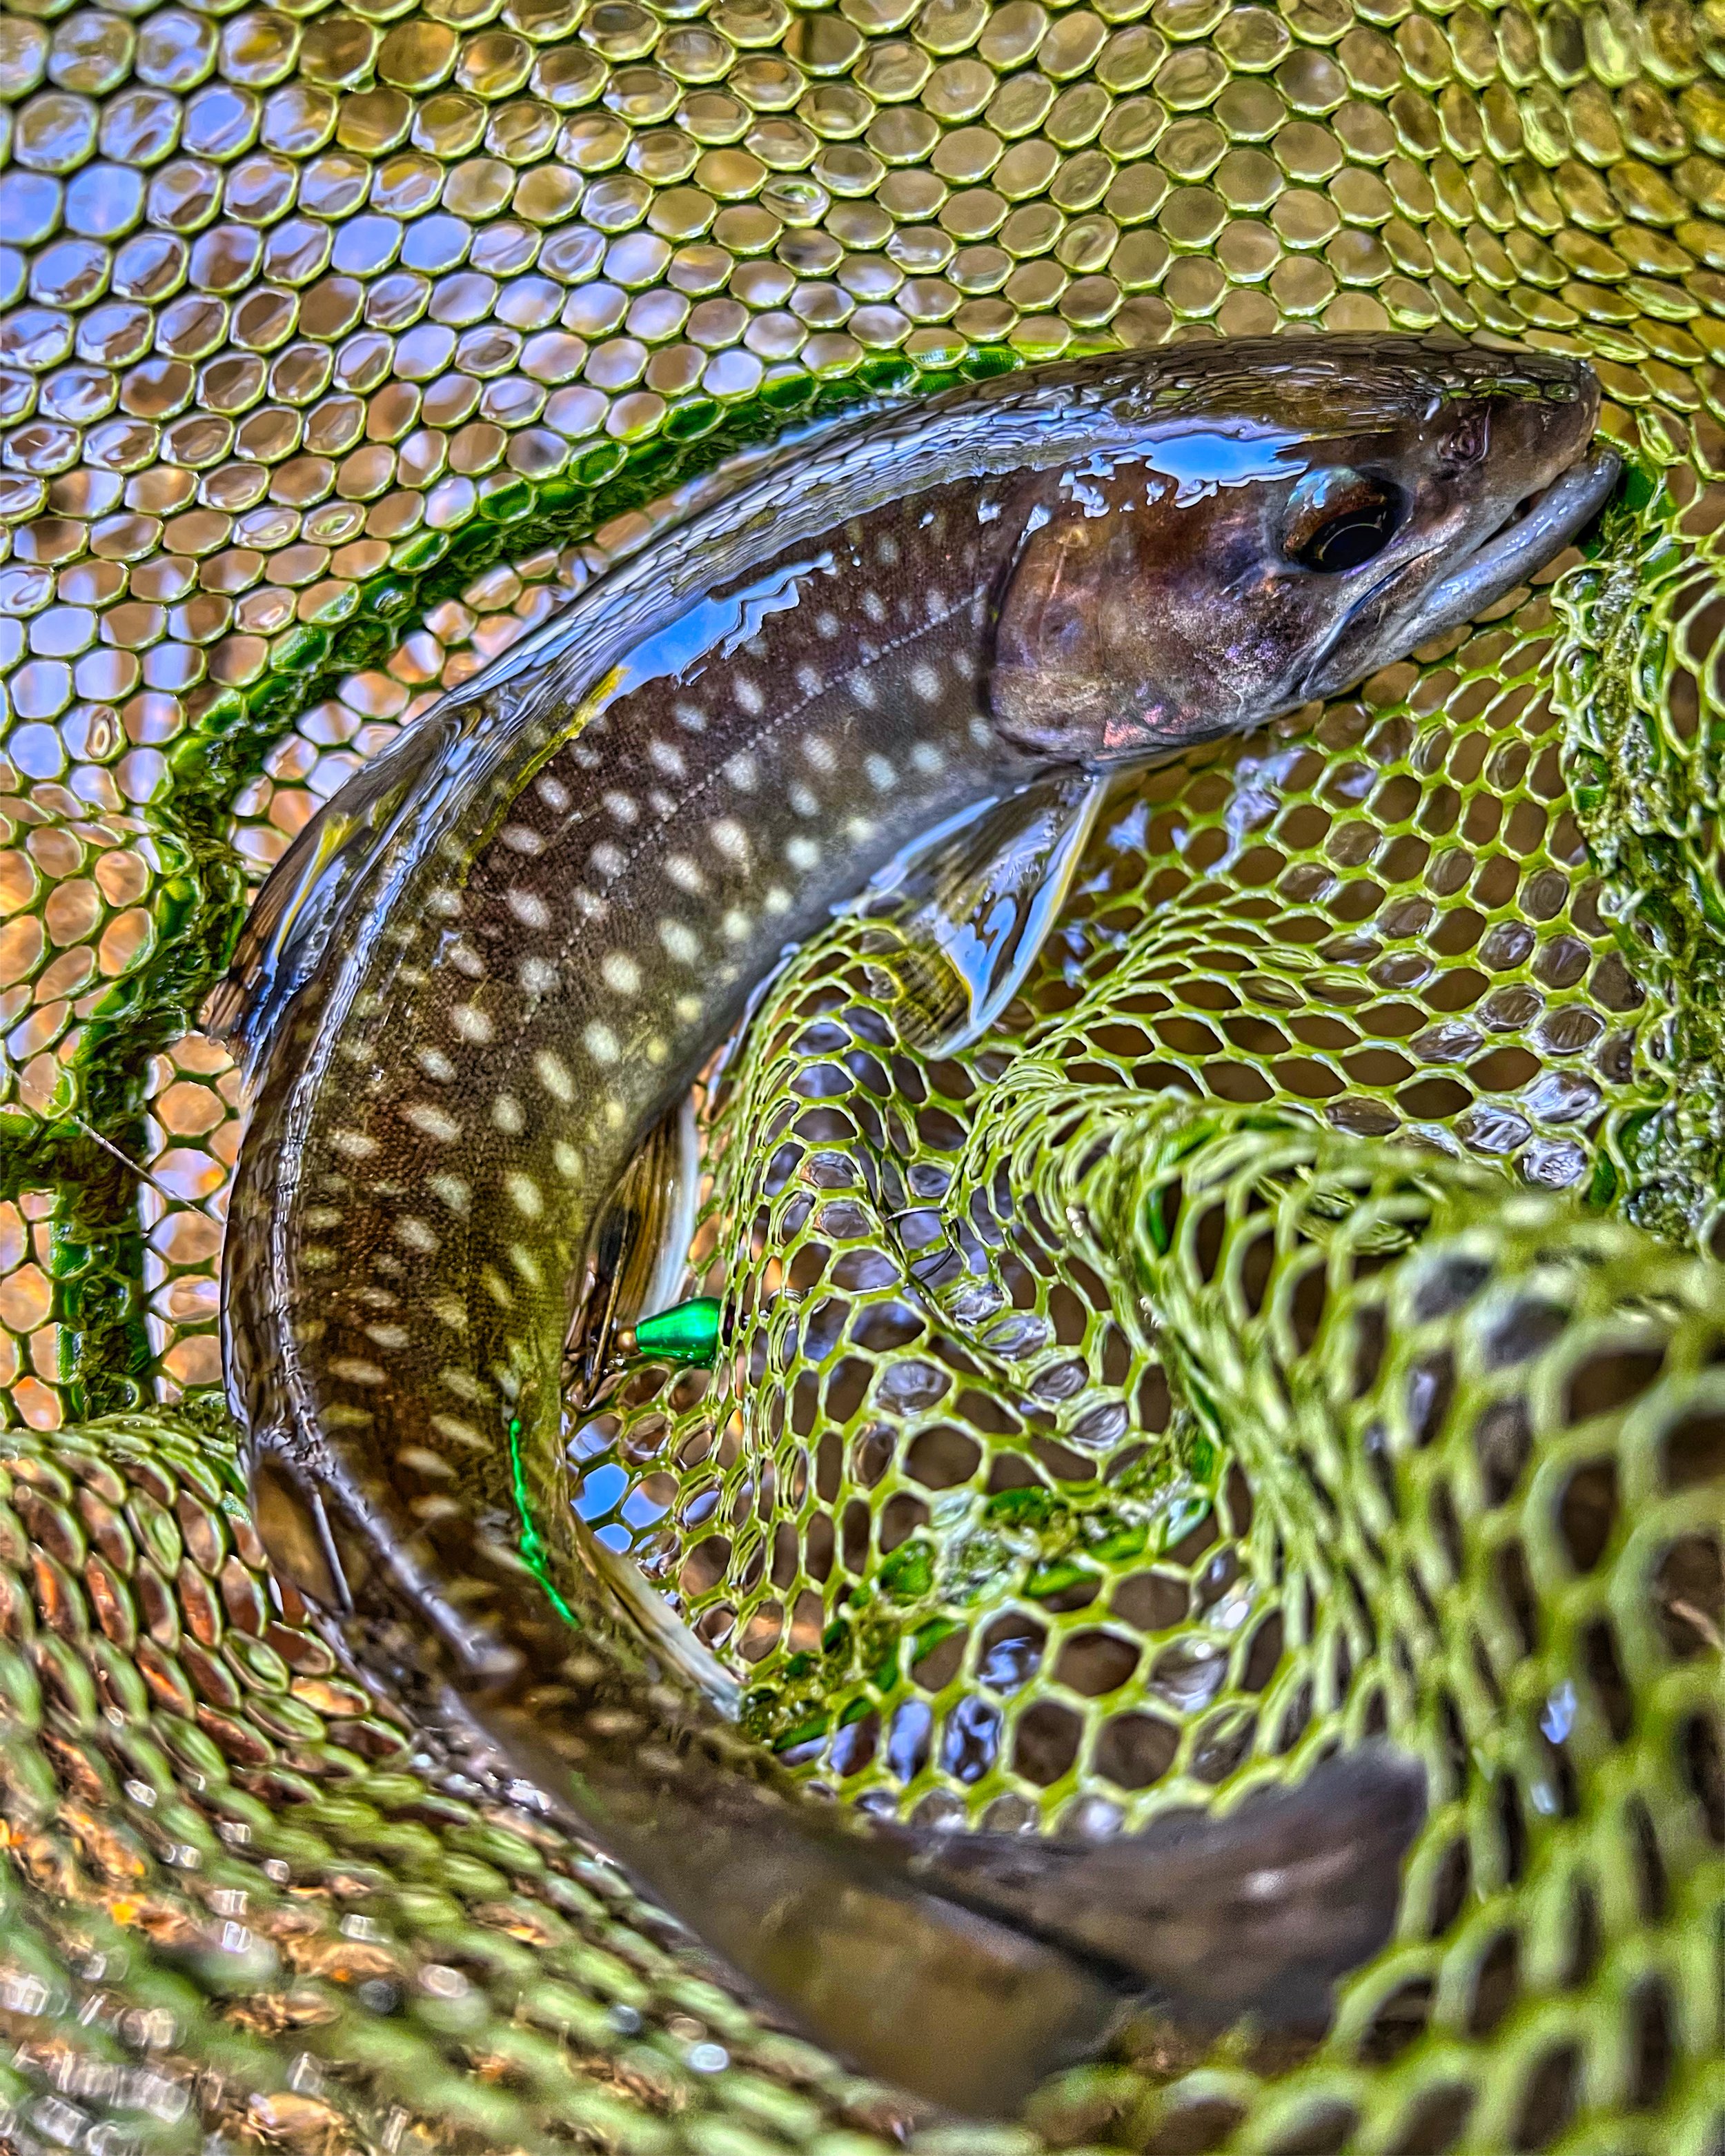 Cherry Trout Jigging off Esan, Hokkaido Using different line systems and  jigs is the key to success!